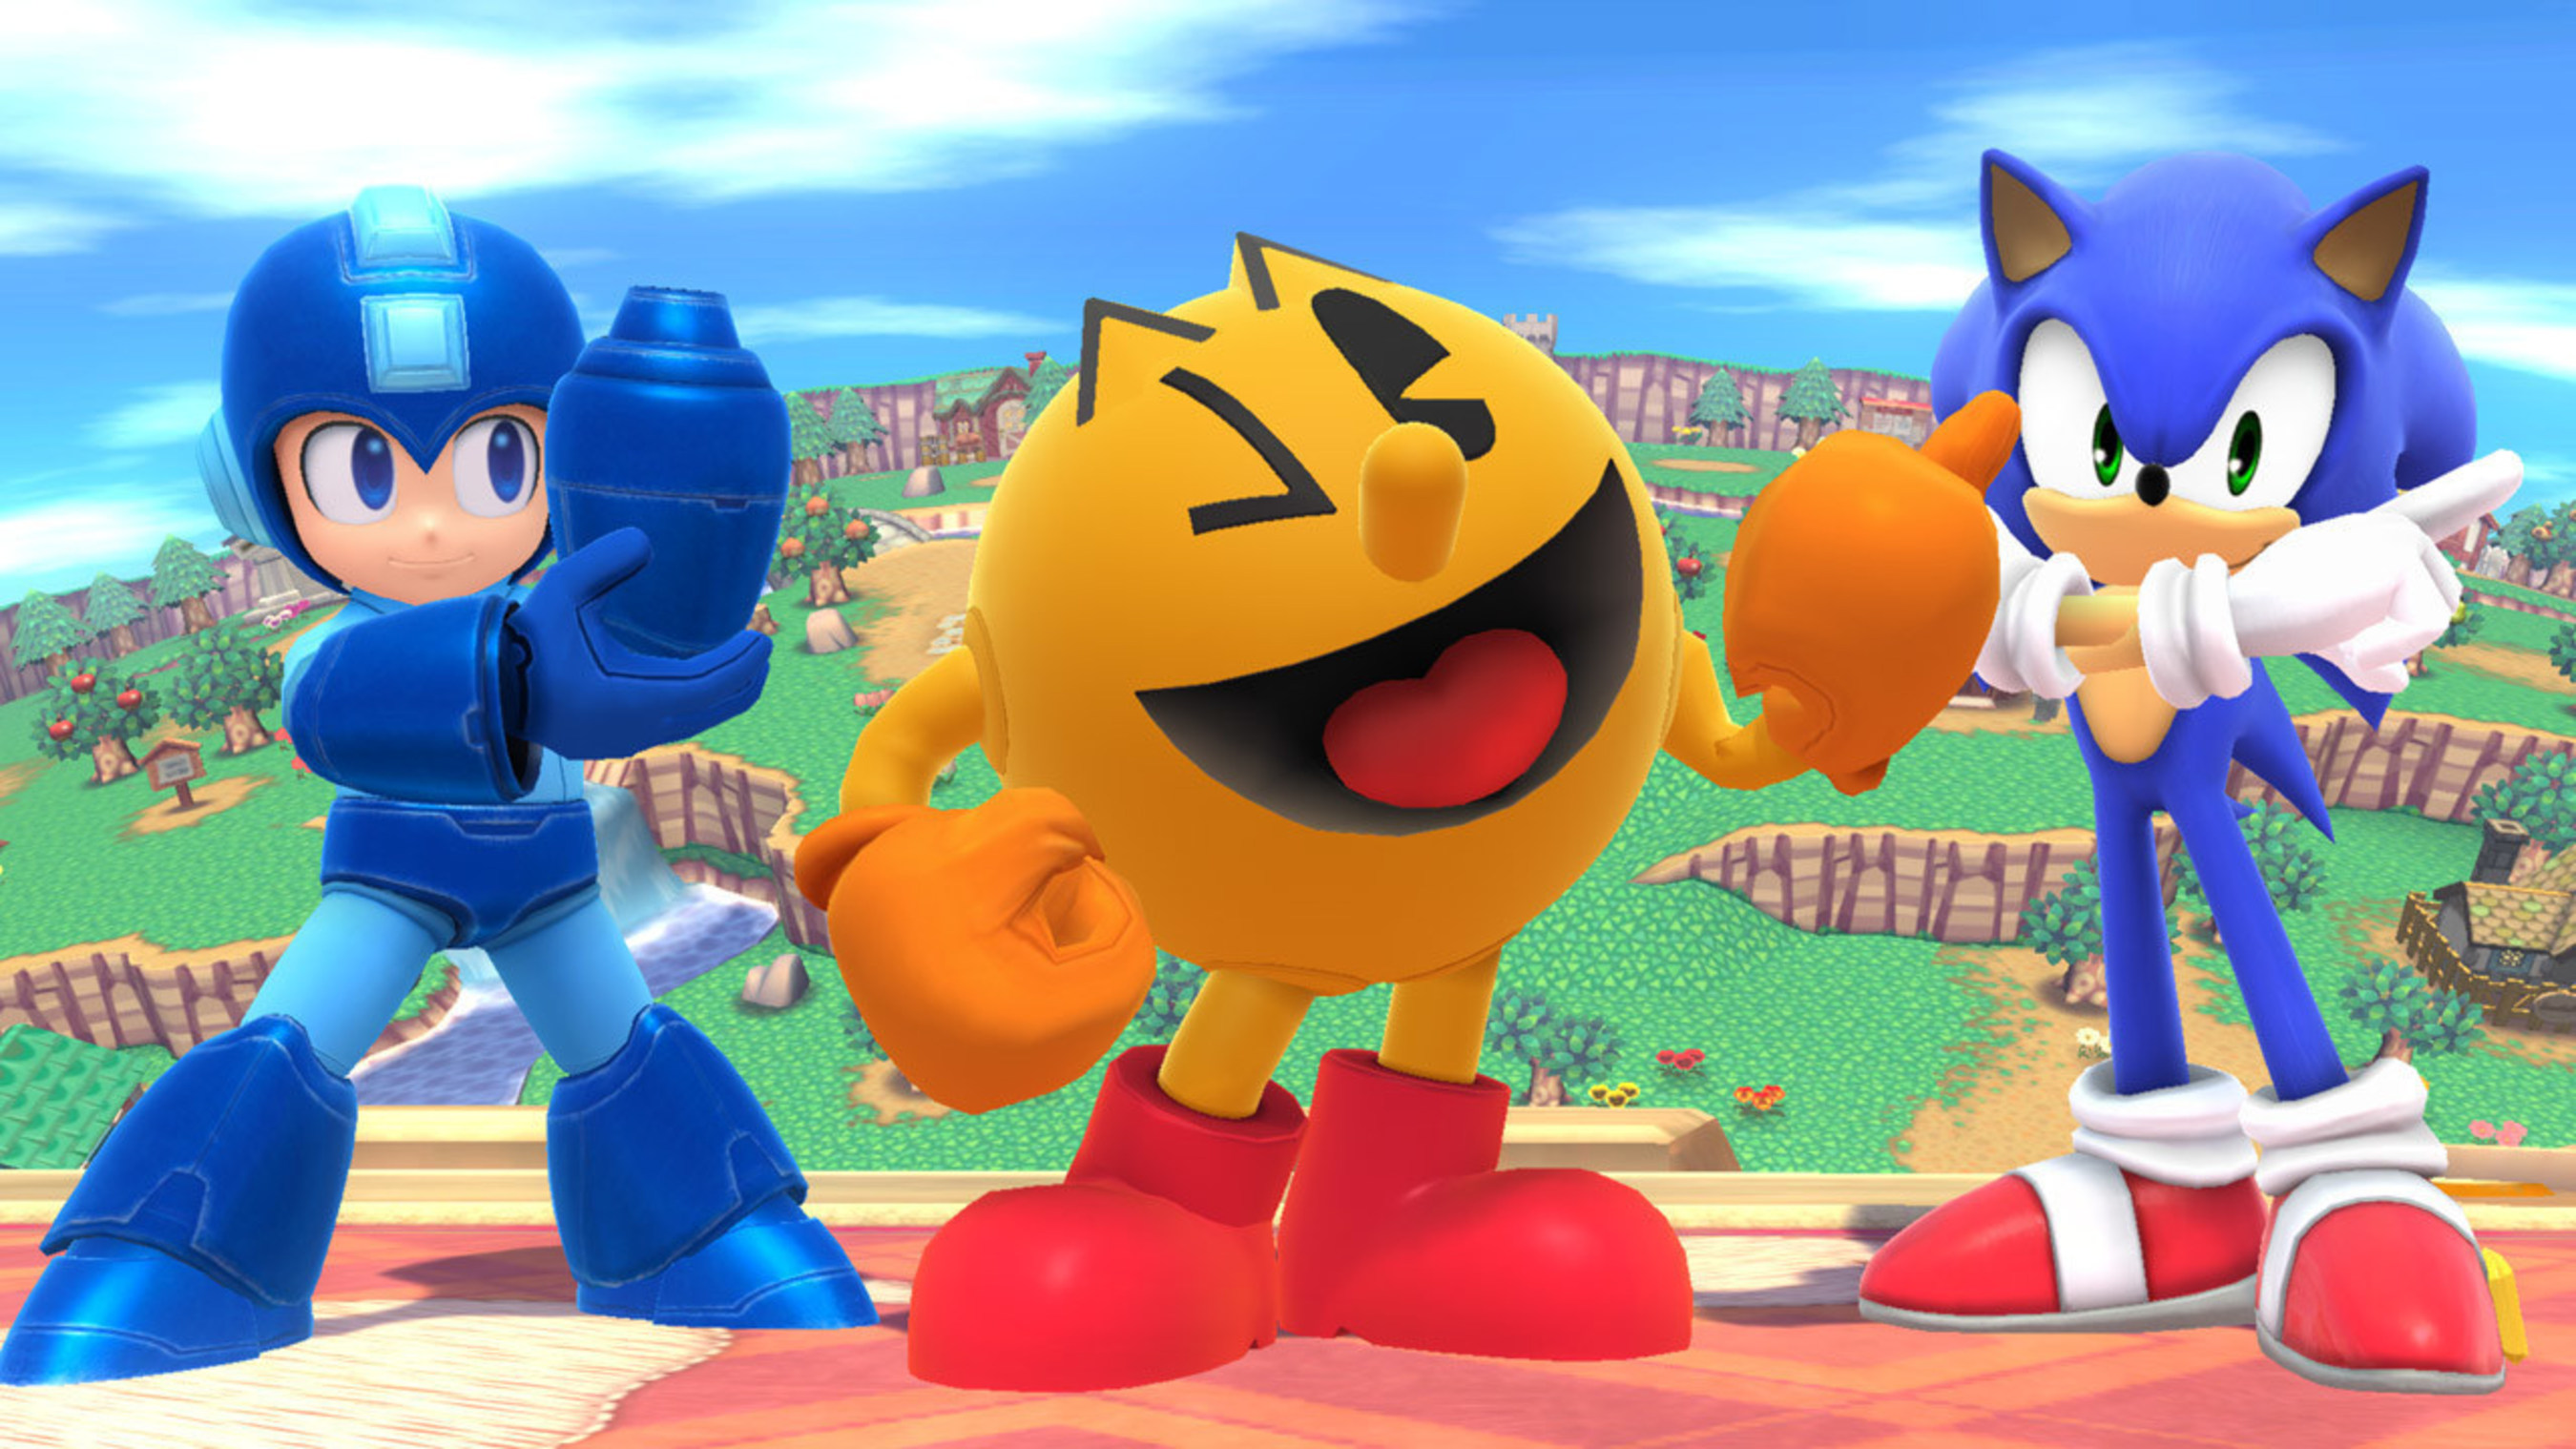 In Super Smash Bros. for Wii U, face off against a massive roster of video game all-stars!